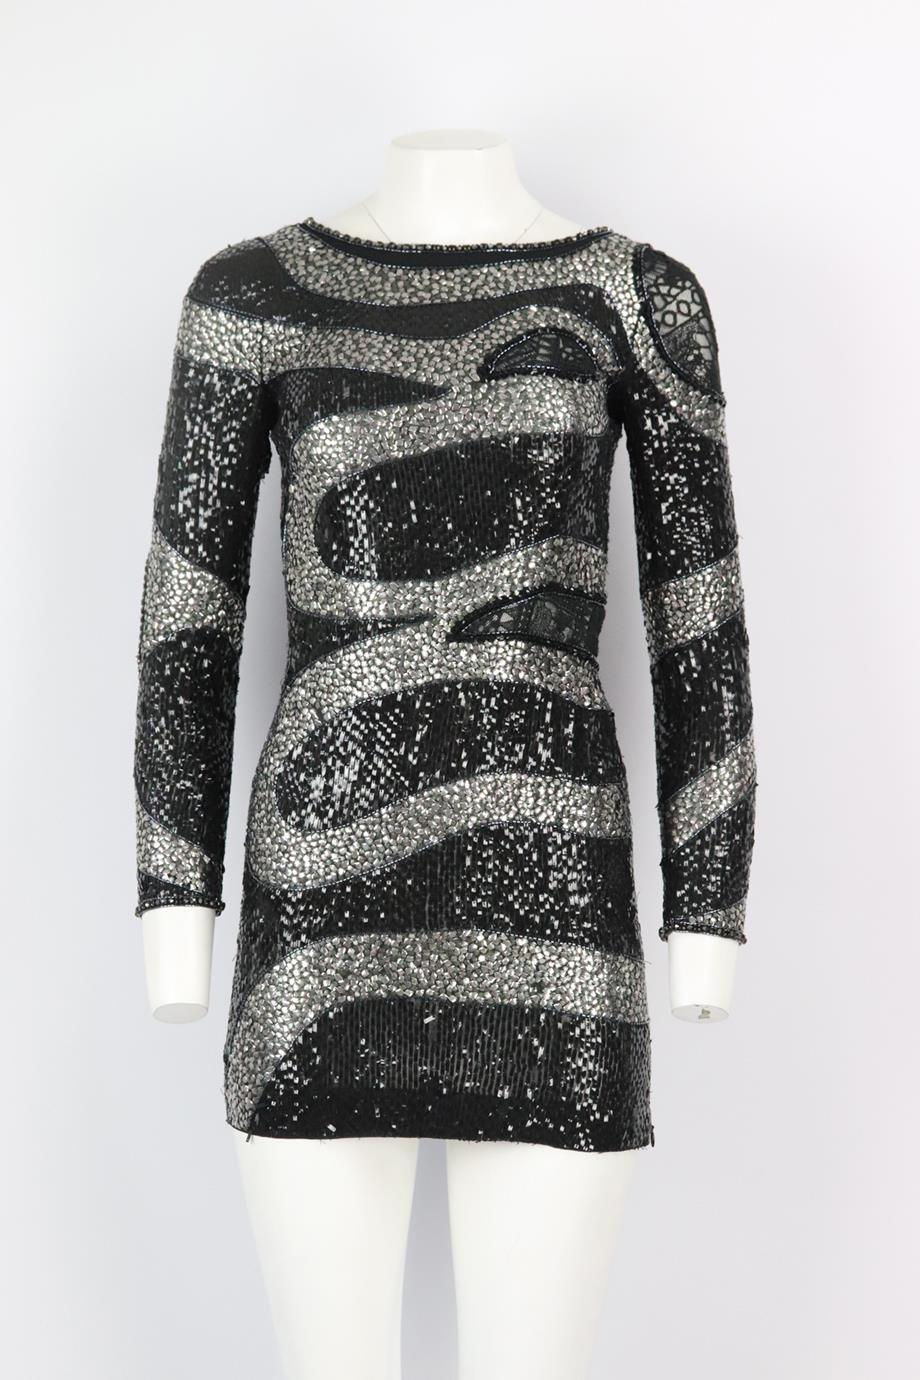 Emilio Pucci embellished silk mini dress. Black and grey. Long sleeve, scoop neck. Zip fastening at side. 100% Silk. Size: IT 38 (UK 6, US 2, FR 34). Bust: 33 in. Waist: 26 in. Hips: 35 in. Length: 30 in. Very good condition - Some sequins missing;